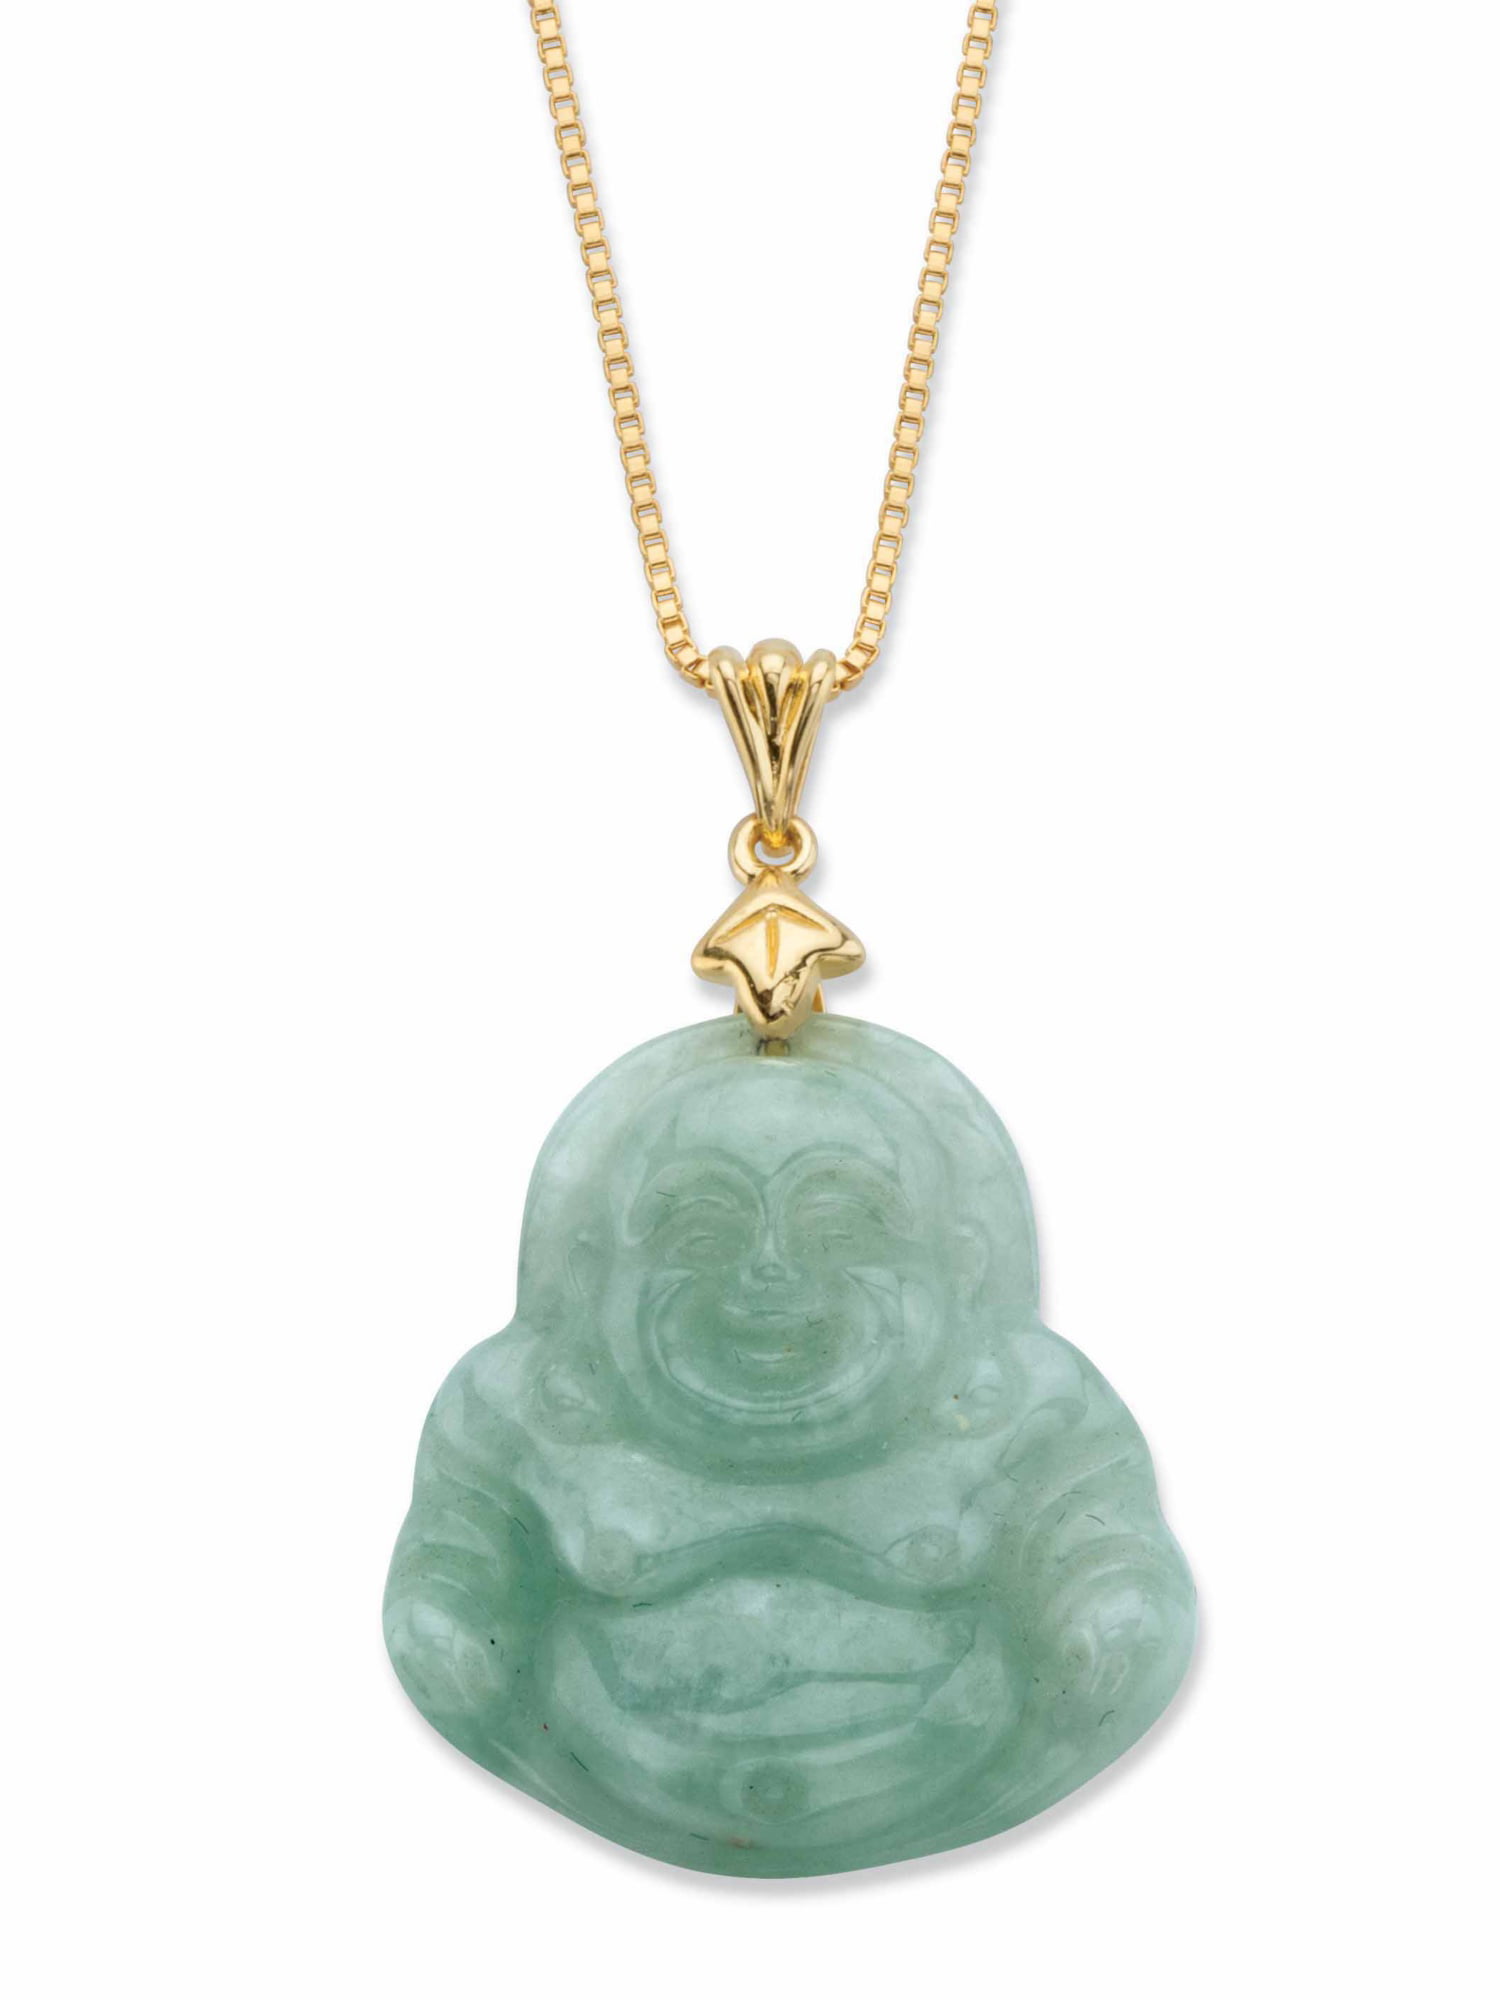 FREE Ship Direct from USA Certified Natural Untreated Grade A Jadeite Jade Pendant Lucky Chinese Fugua \u798f\u74dc